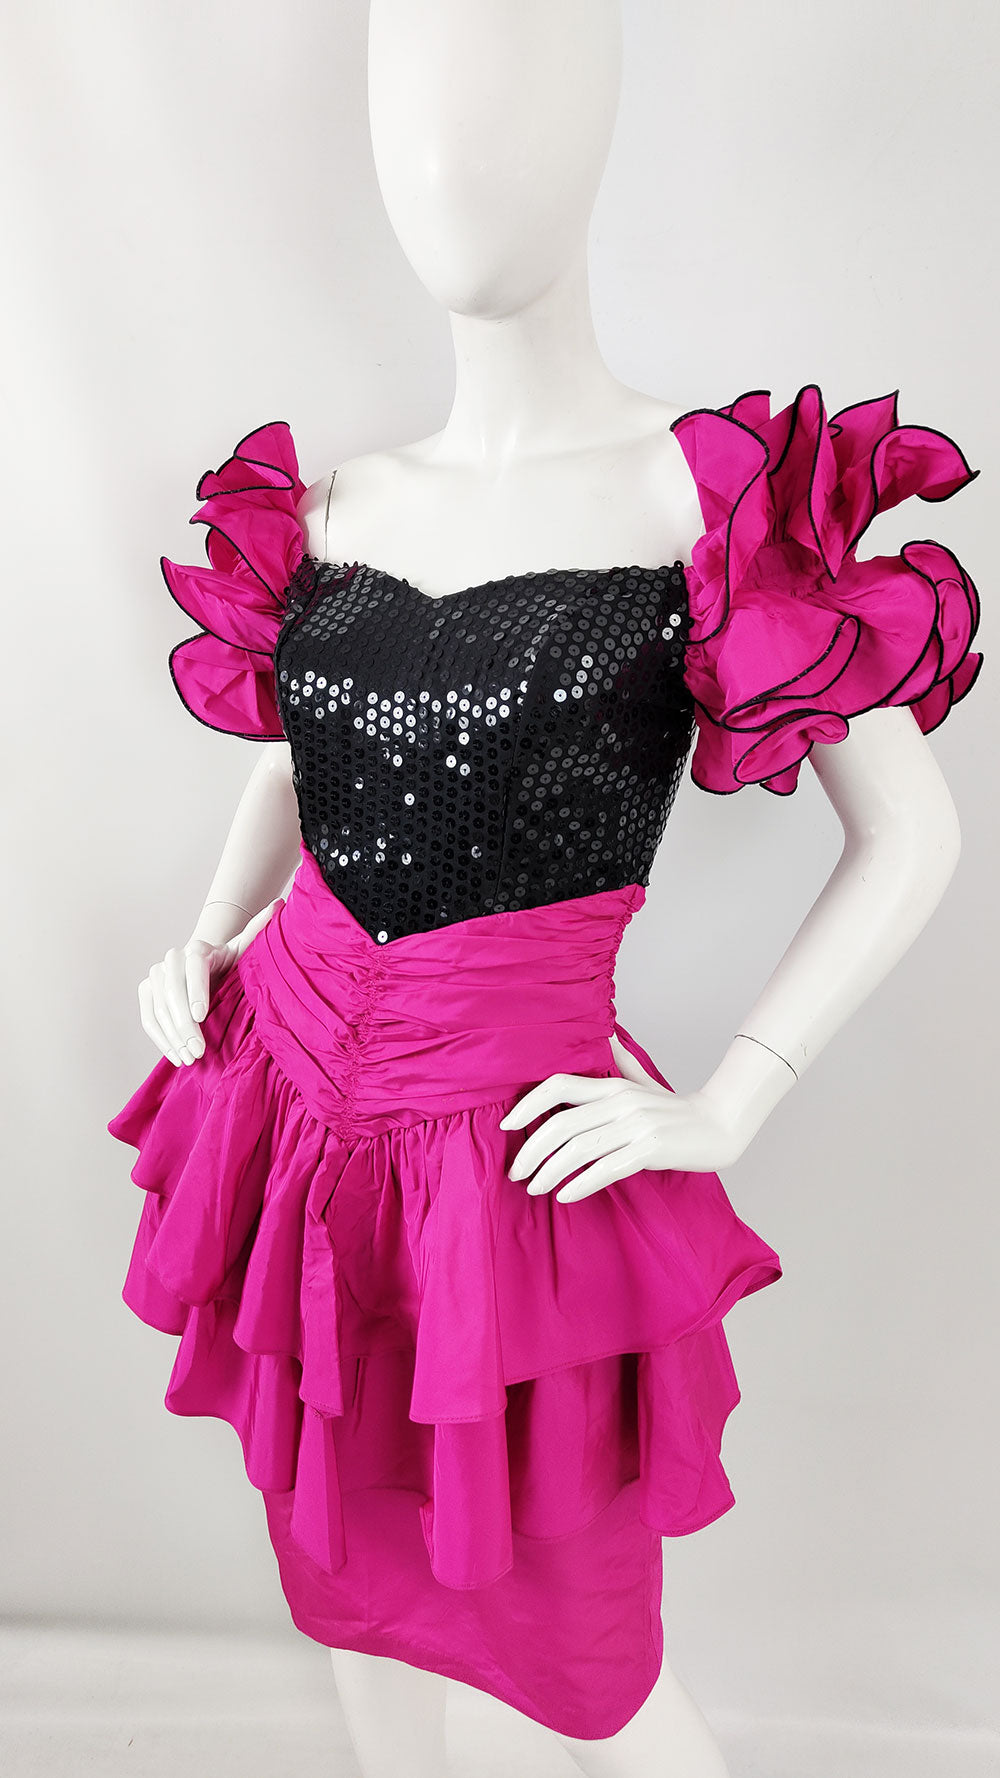 An image of a black and pink taffeta ruffle sleeve prom dress from the 1980s